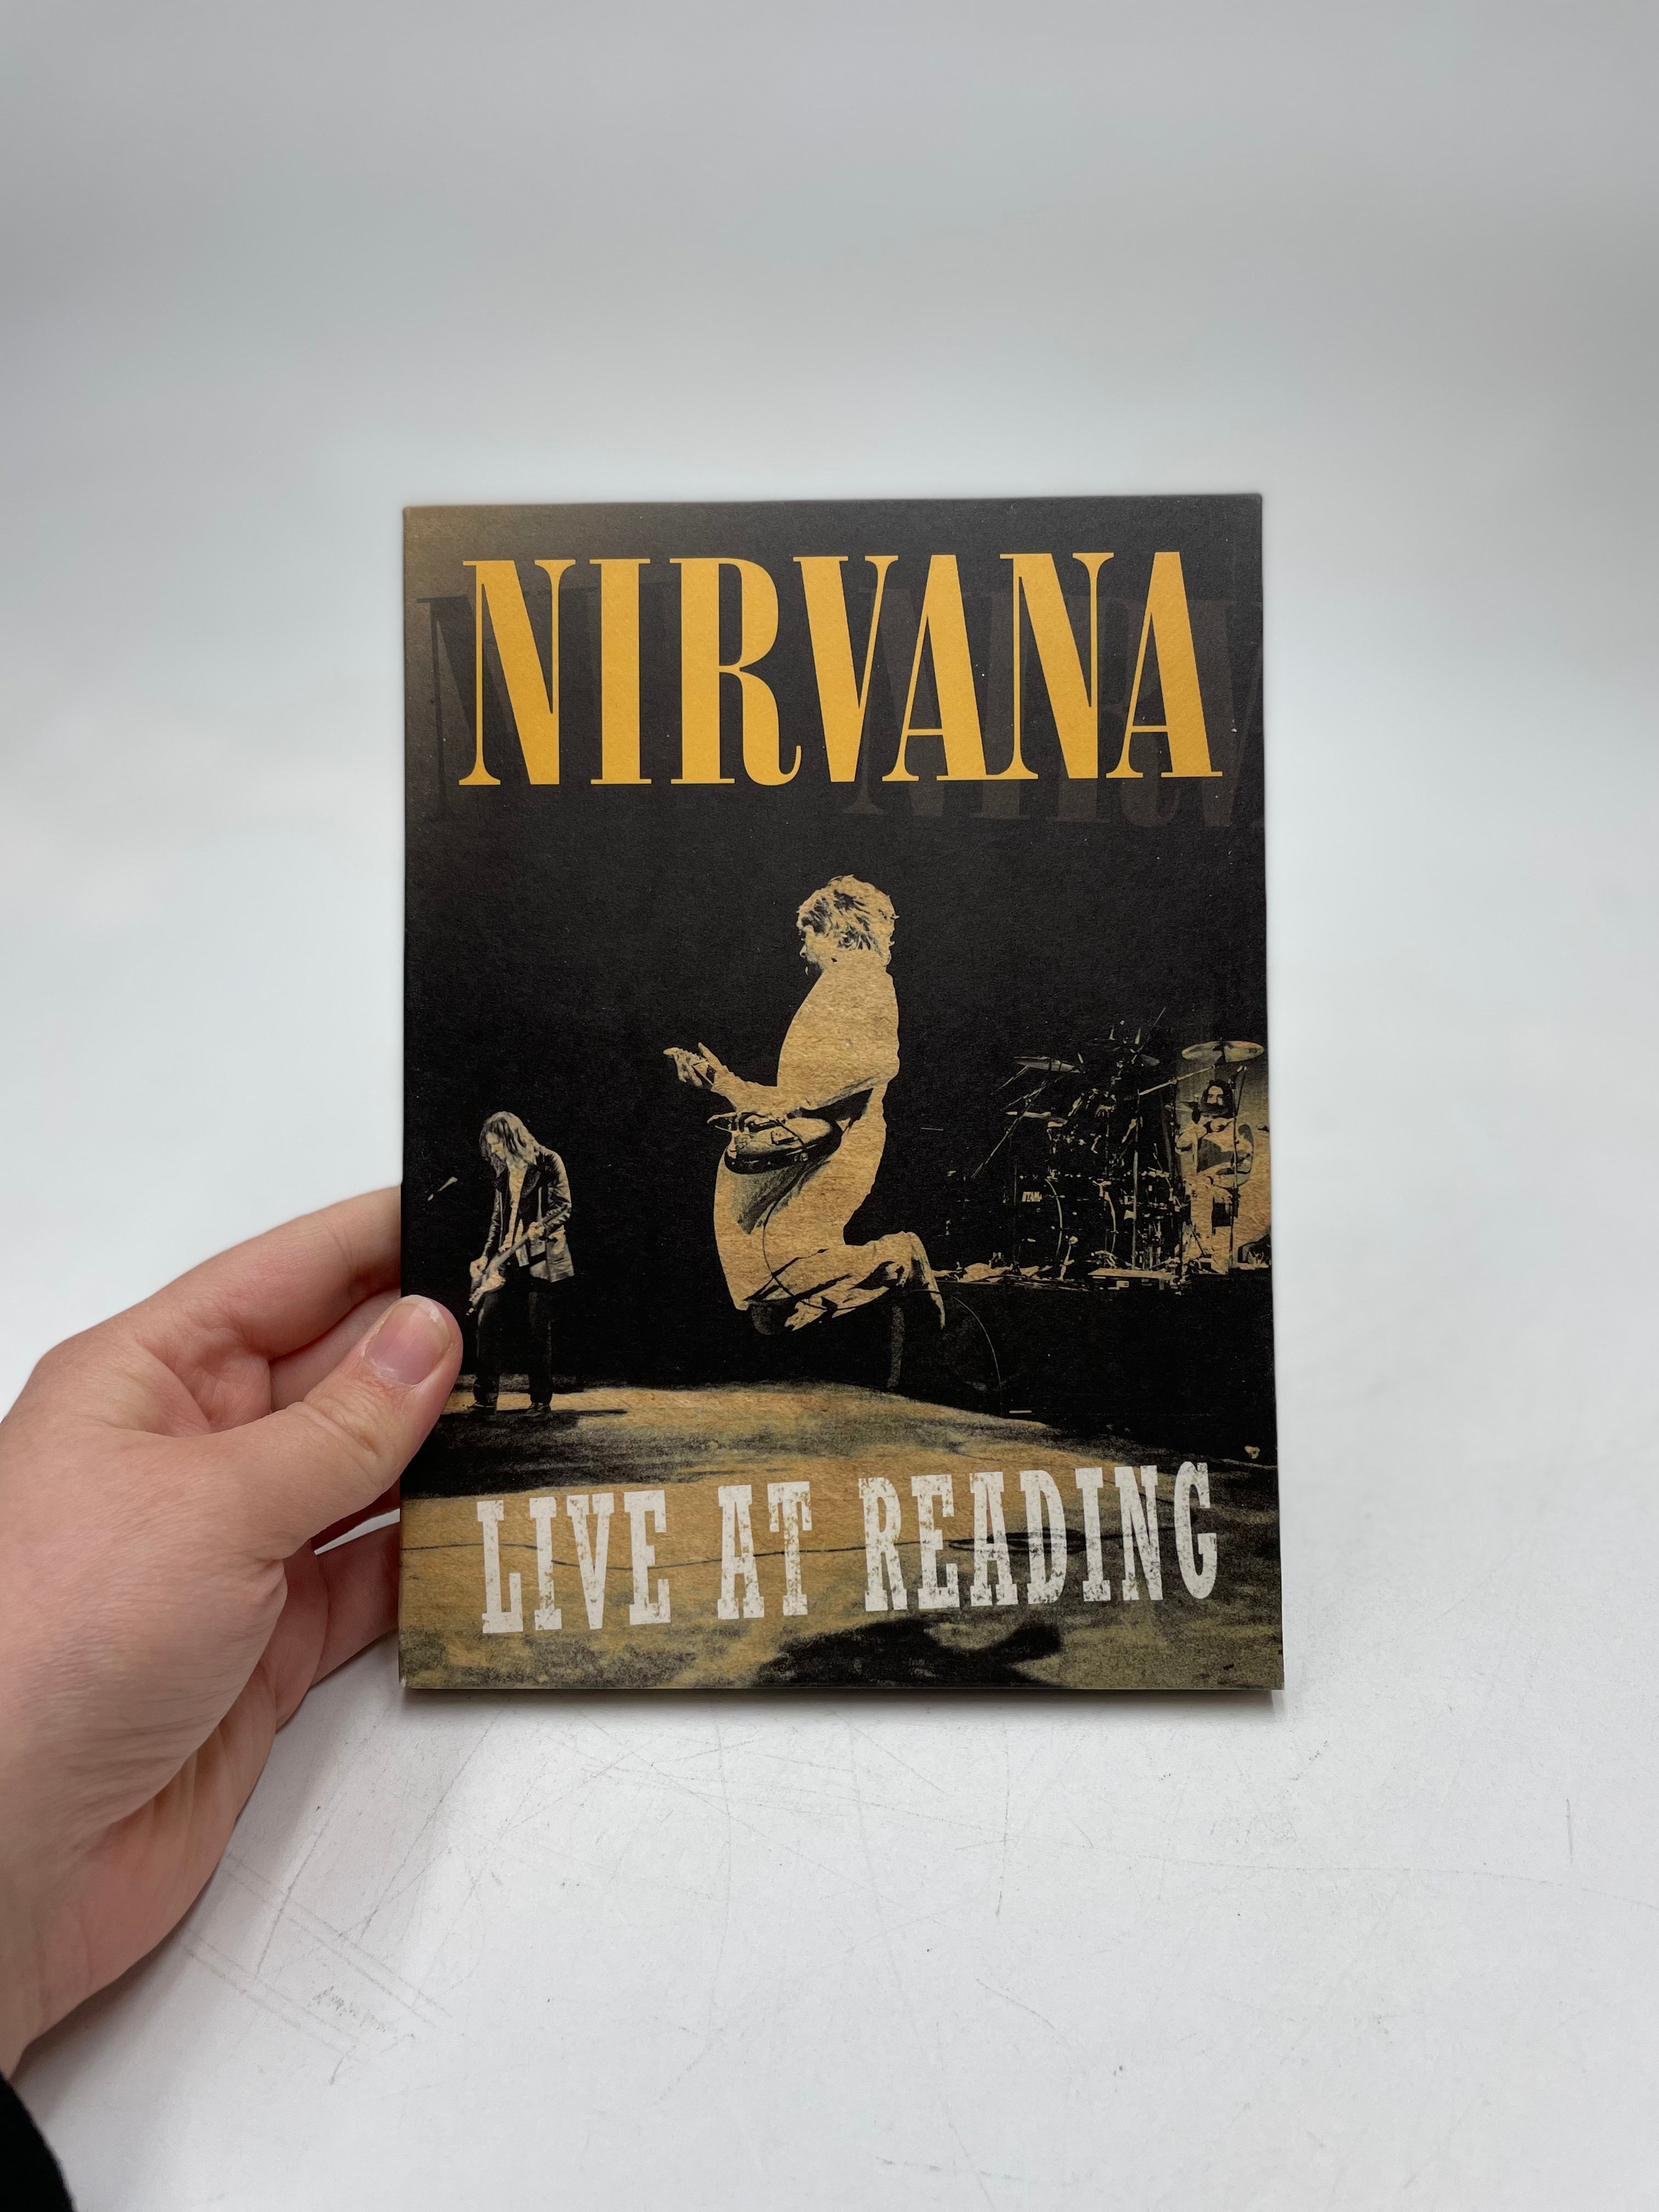 Nirvana Live at Reading (Deluxe CD+DVD Limited Edition)